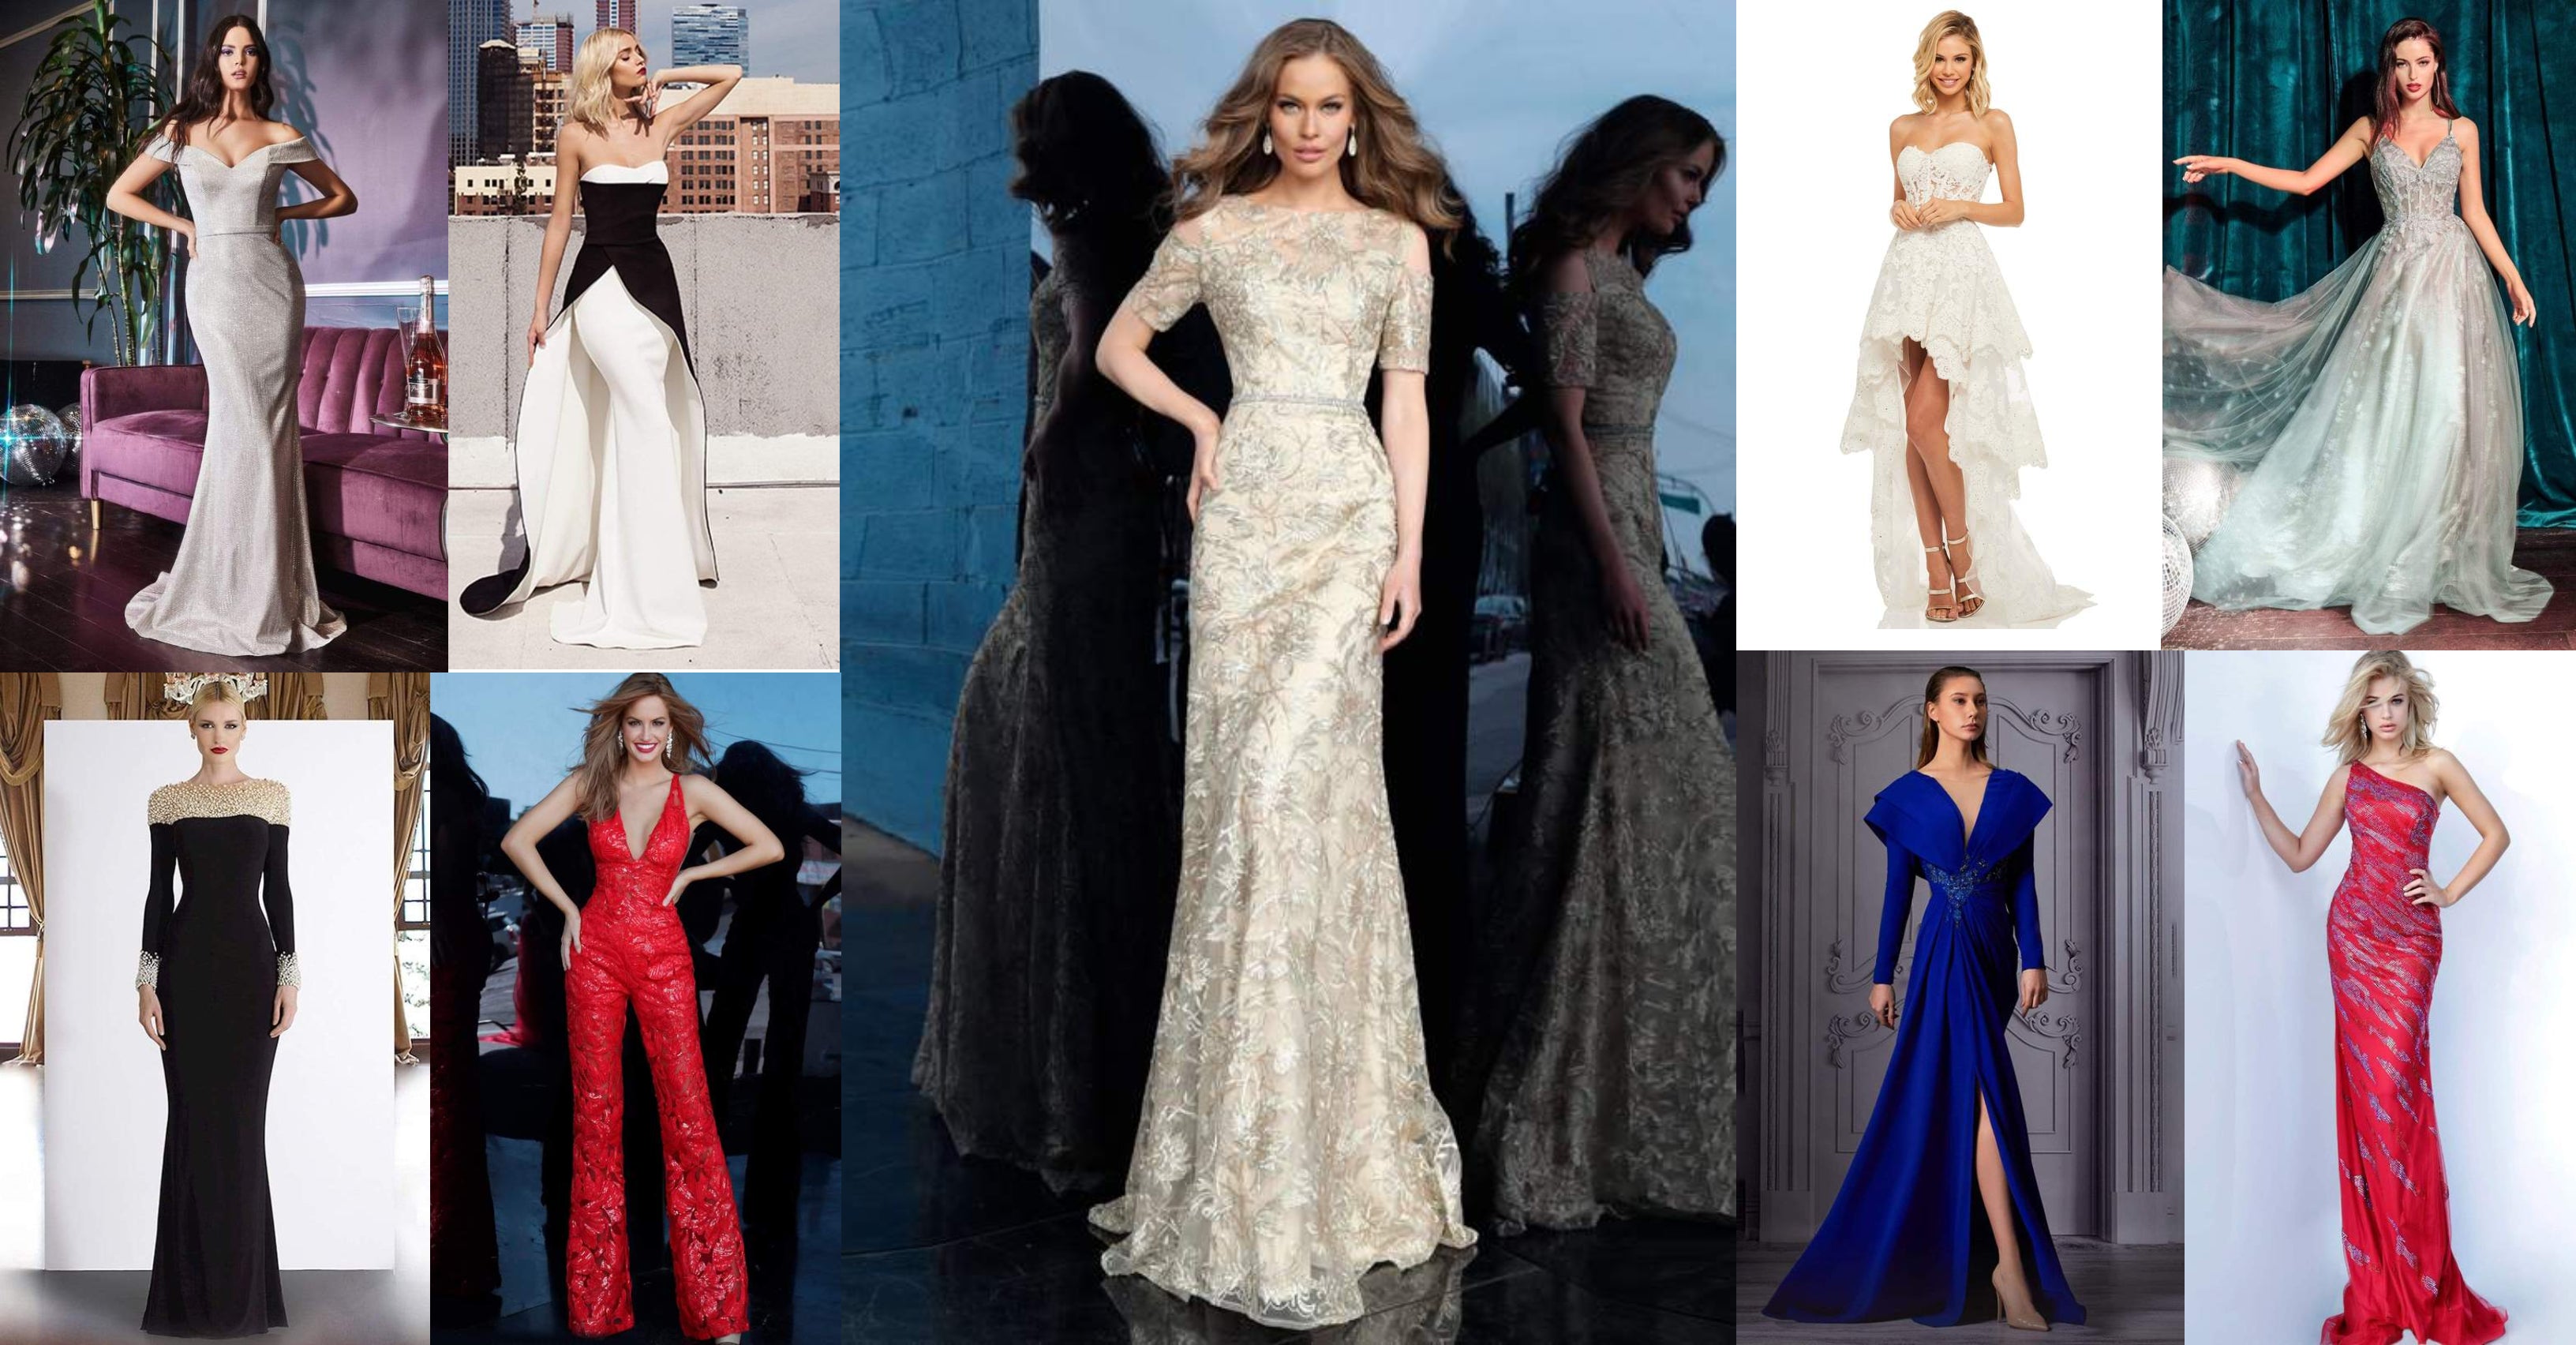 Doting On Designer Dresses? Here Are 5 Best Styles Of Your Dreams